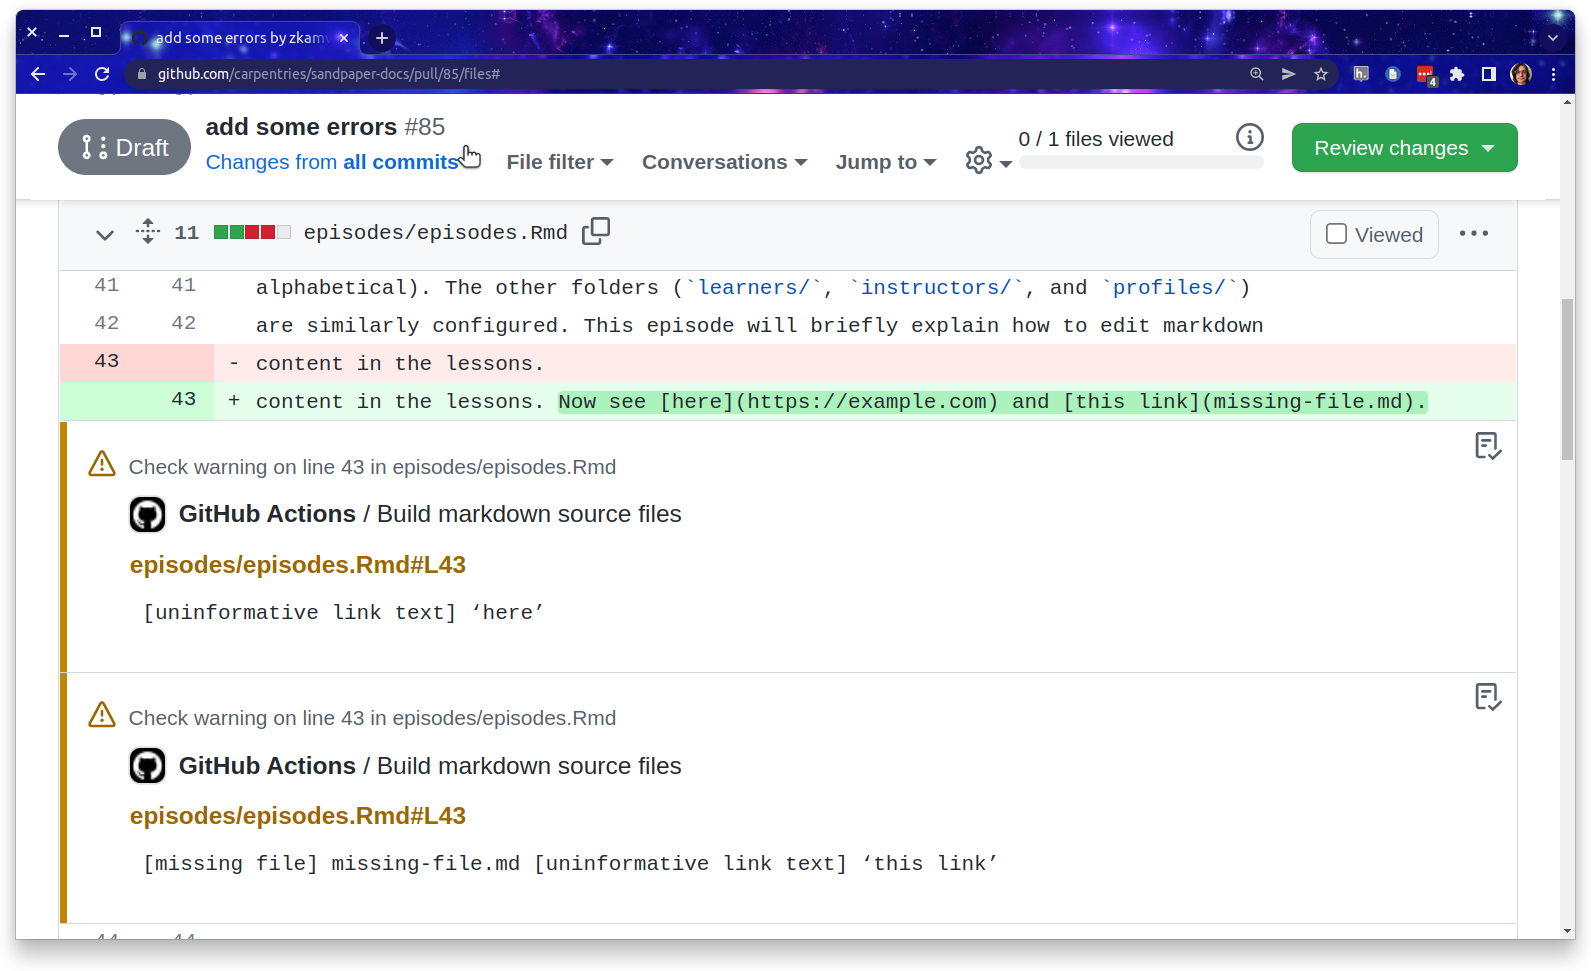 Screen capture of the 'files changed' tab of a pull request showing one line of text changed to include uninformative and missing links. Below the changed text are two alert boxes that show check warnings on that particular line of the file.